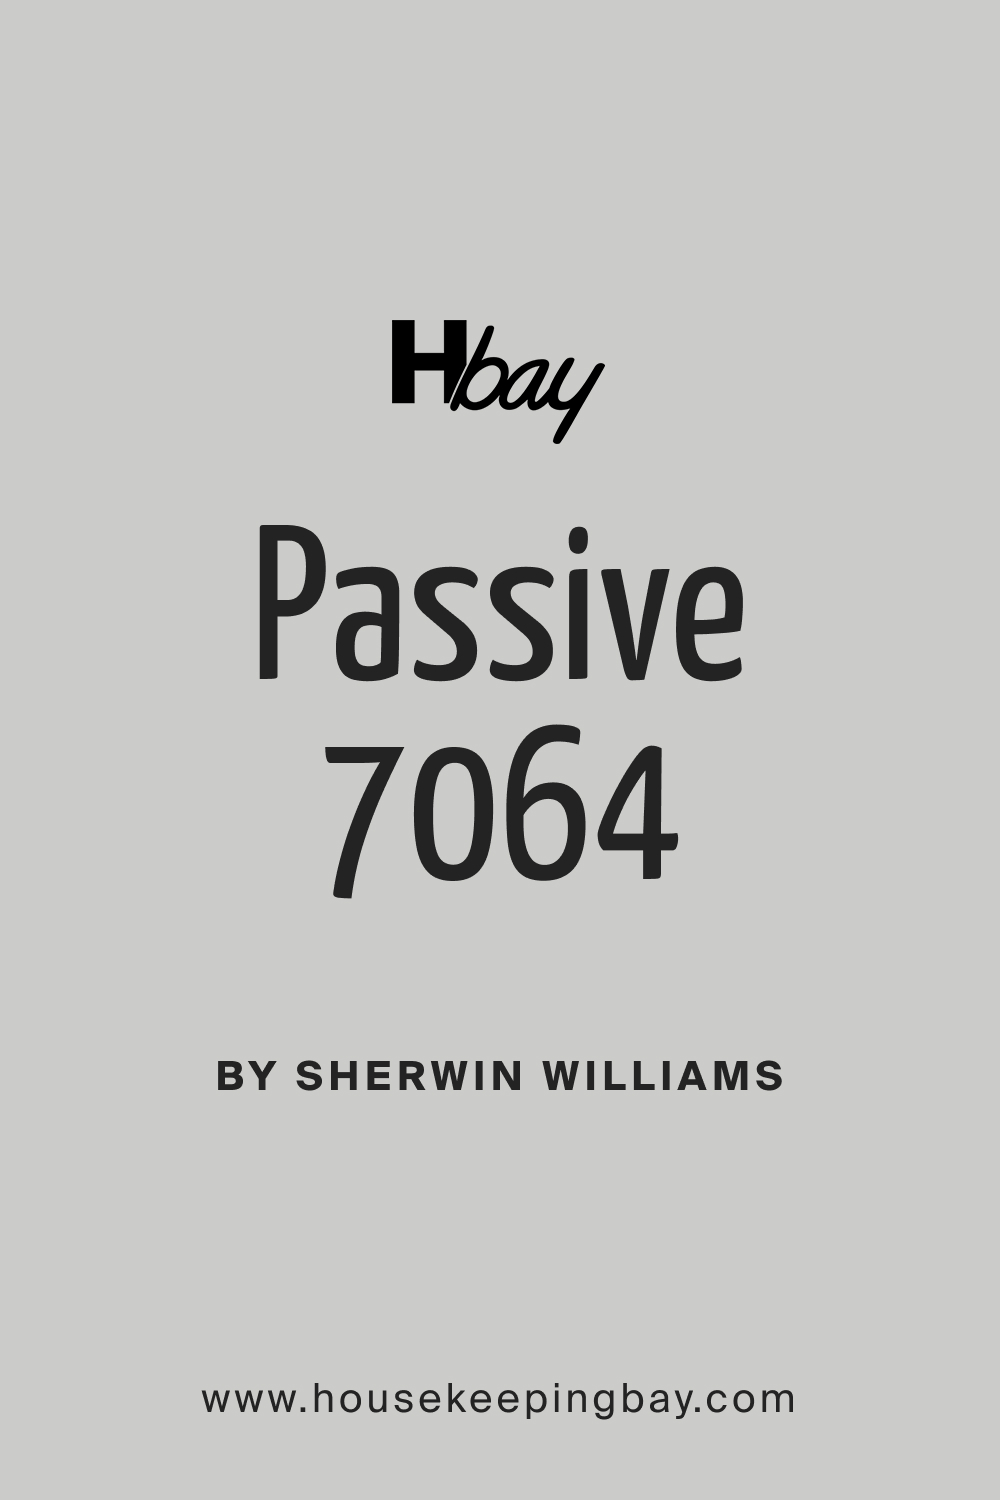 Passive SW 7064 Paint Color by Sherwin Williams